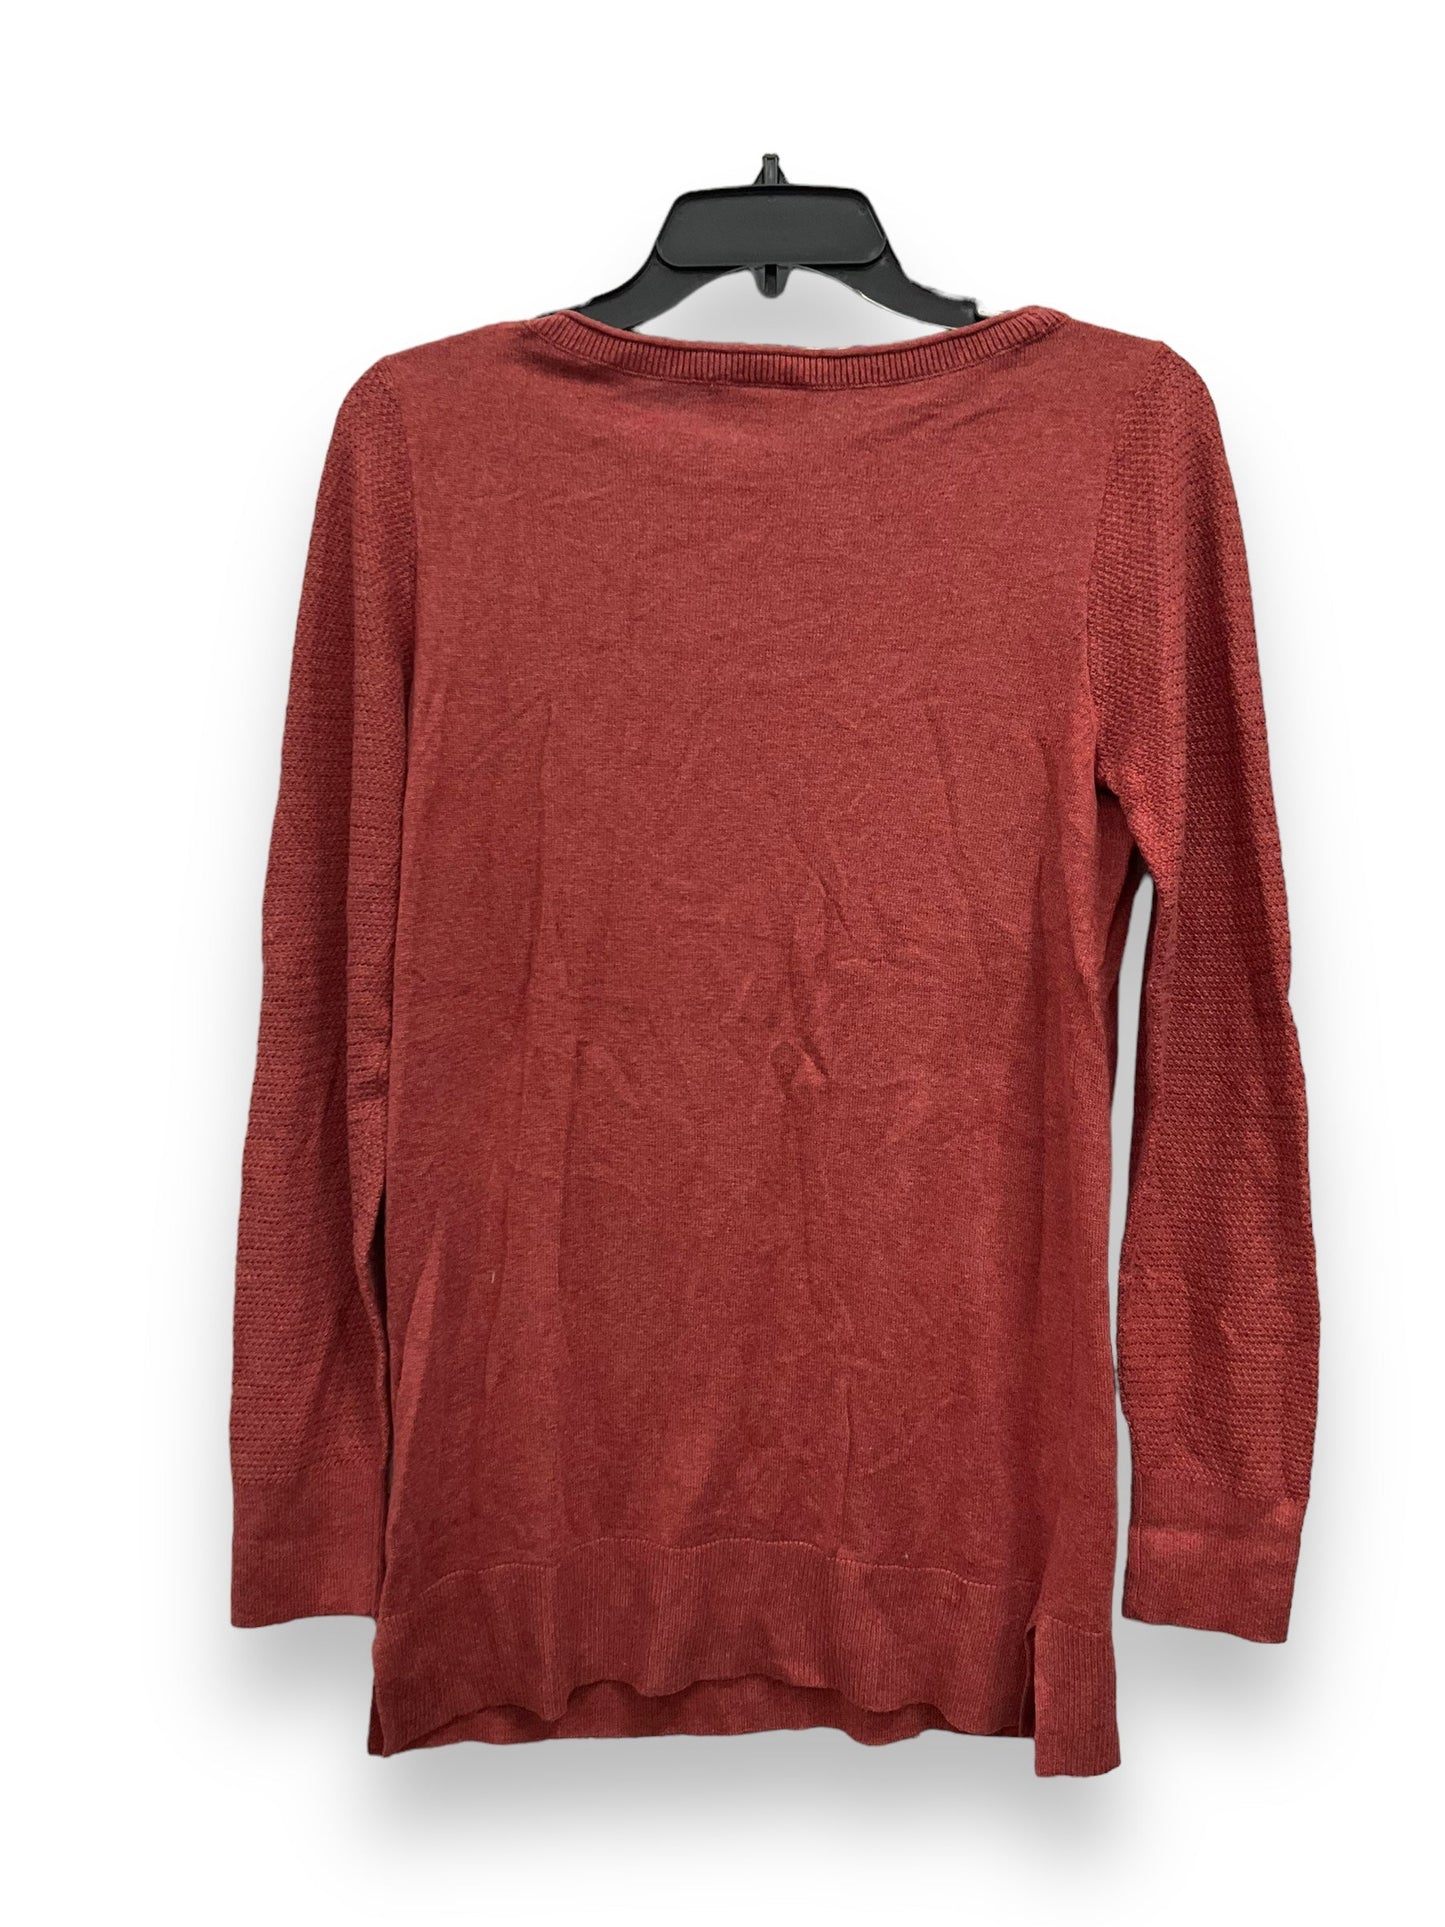 Red Top Long Sleeve Loft, Size Xs